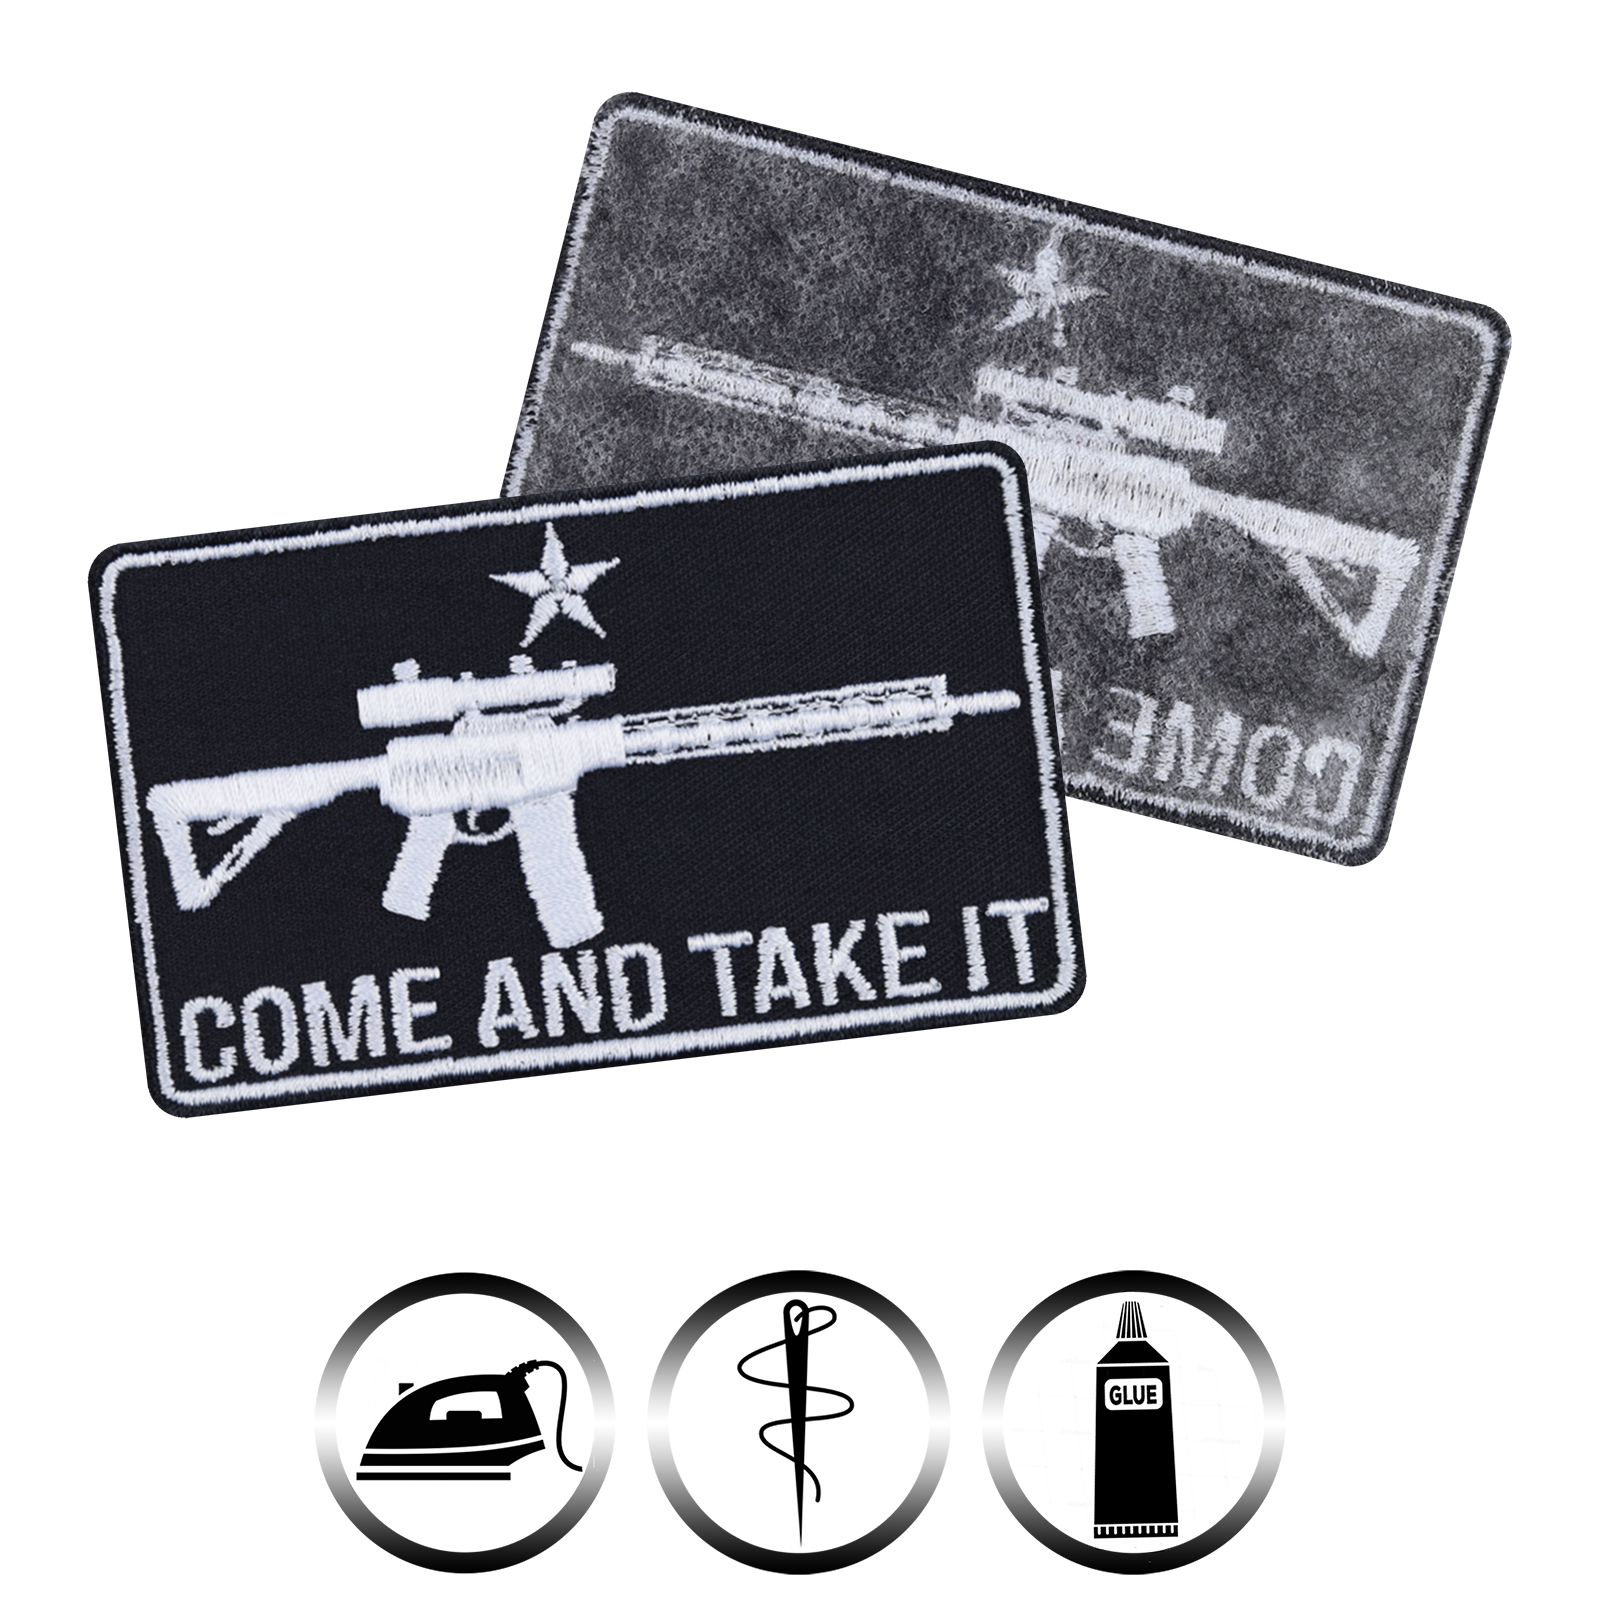 Come and take it - Patch